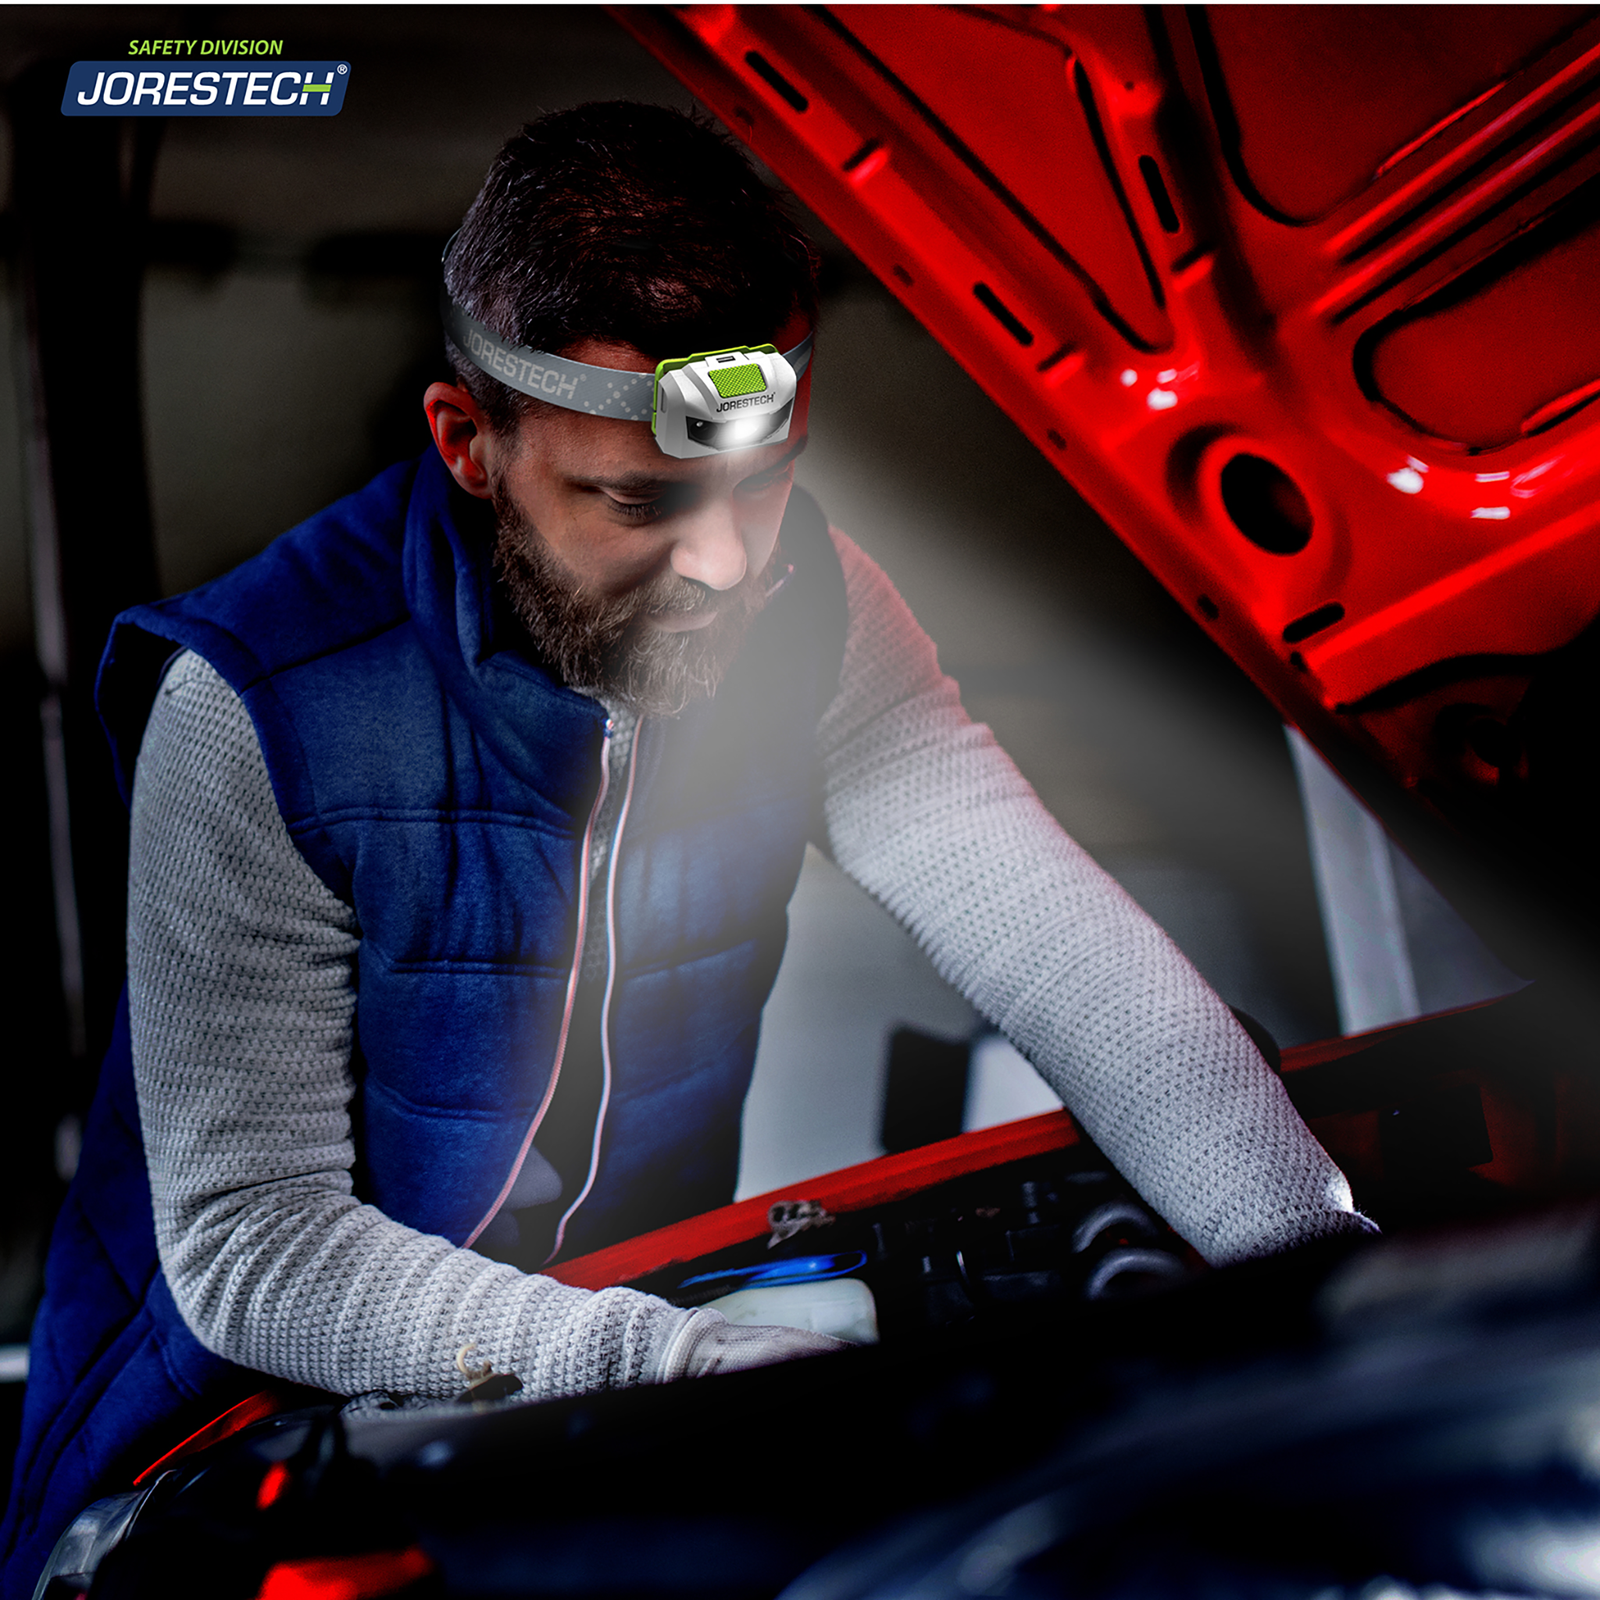 A man wearing a JORESTECH led head lamp while servicing his car at night in the middle of the road.